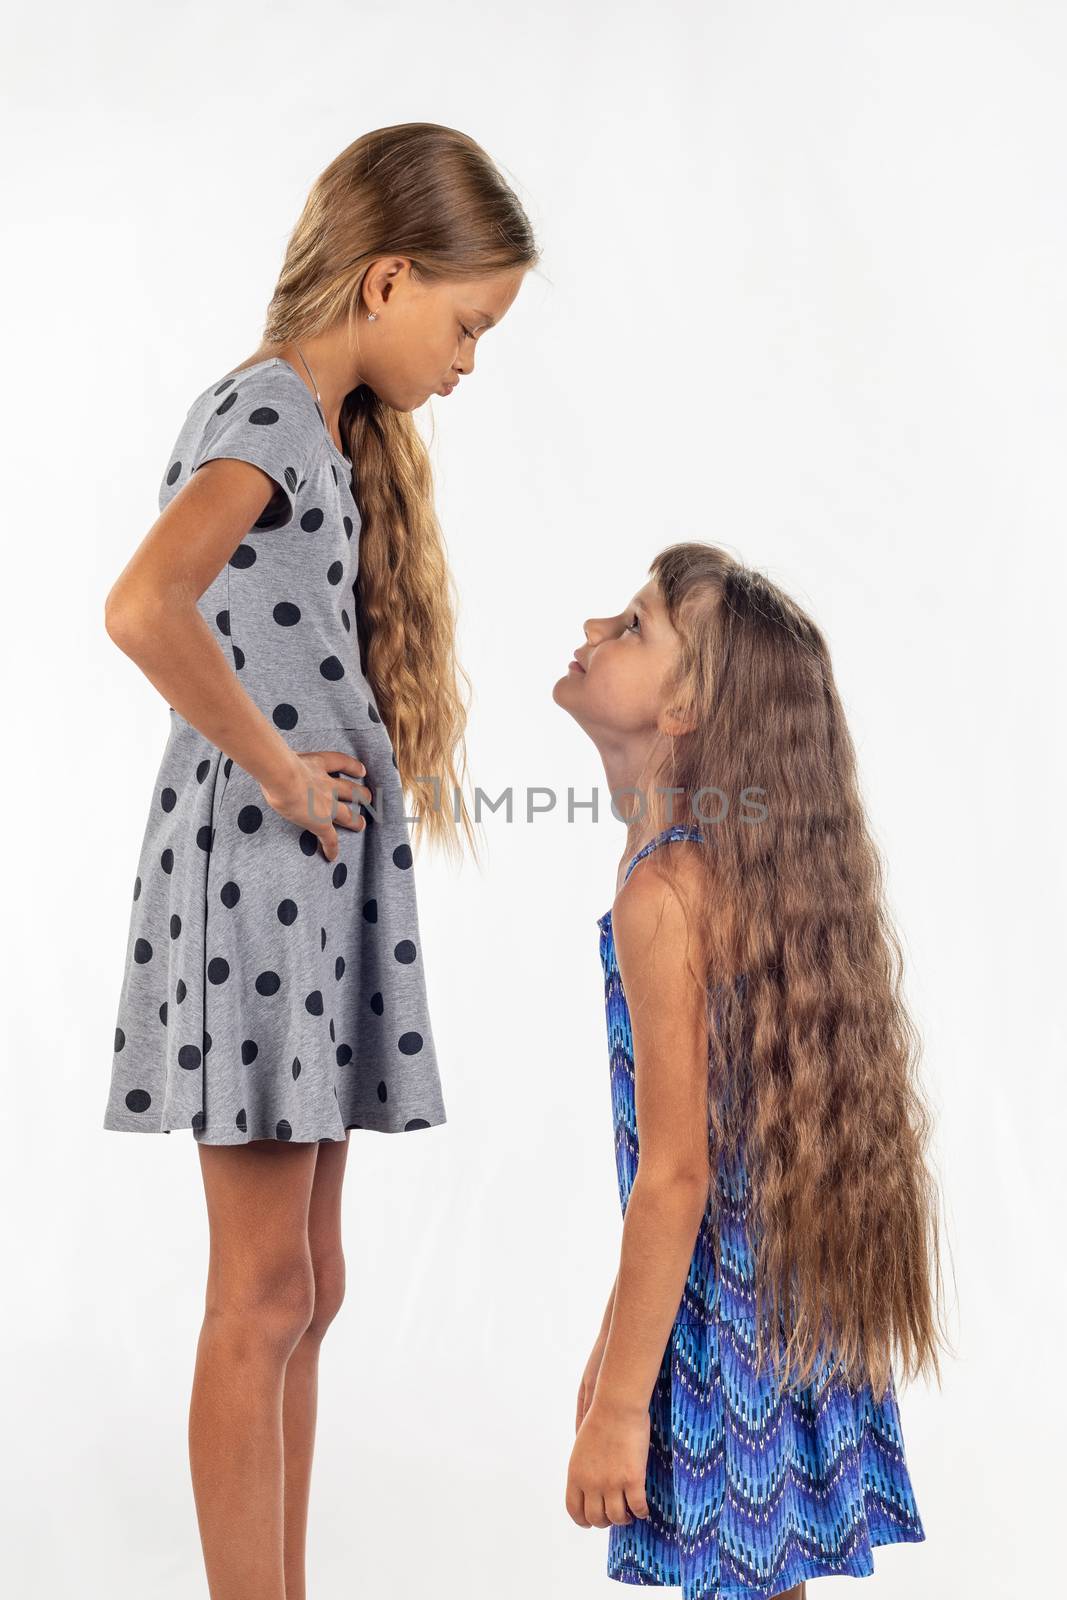 Two girls of different stature, one stood on a chair and became even taller